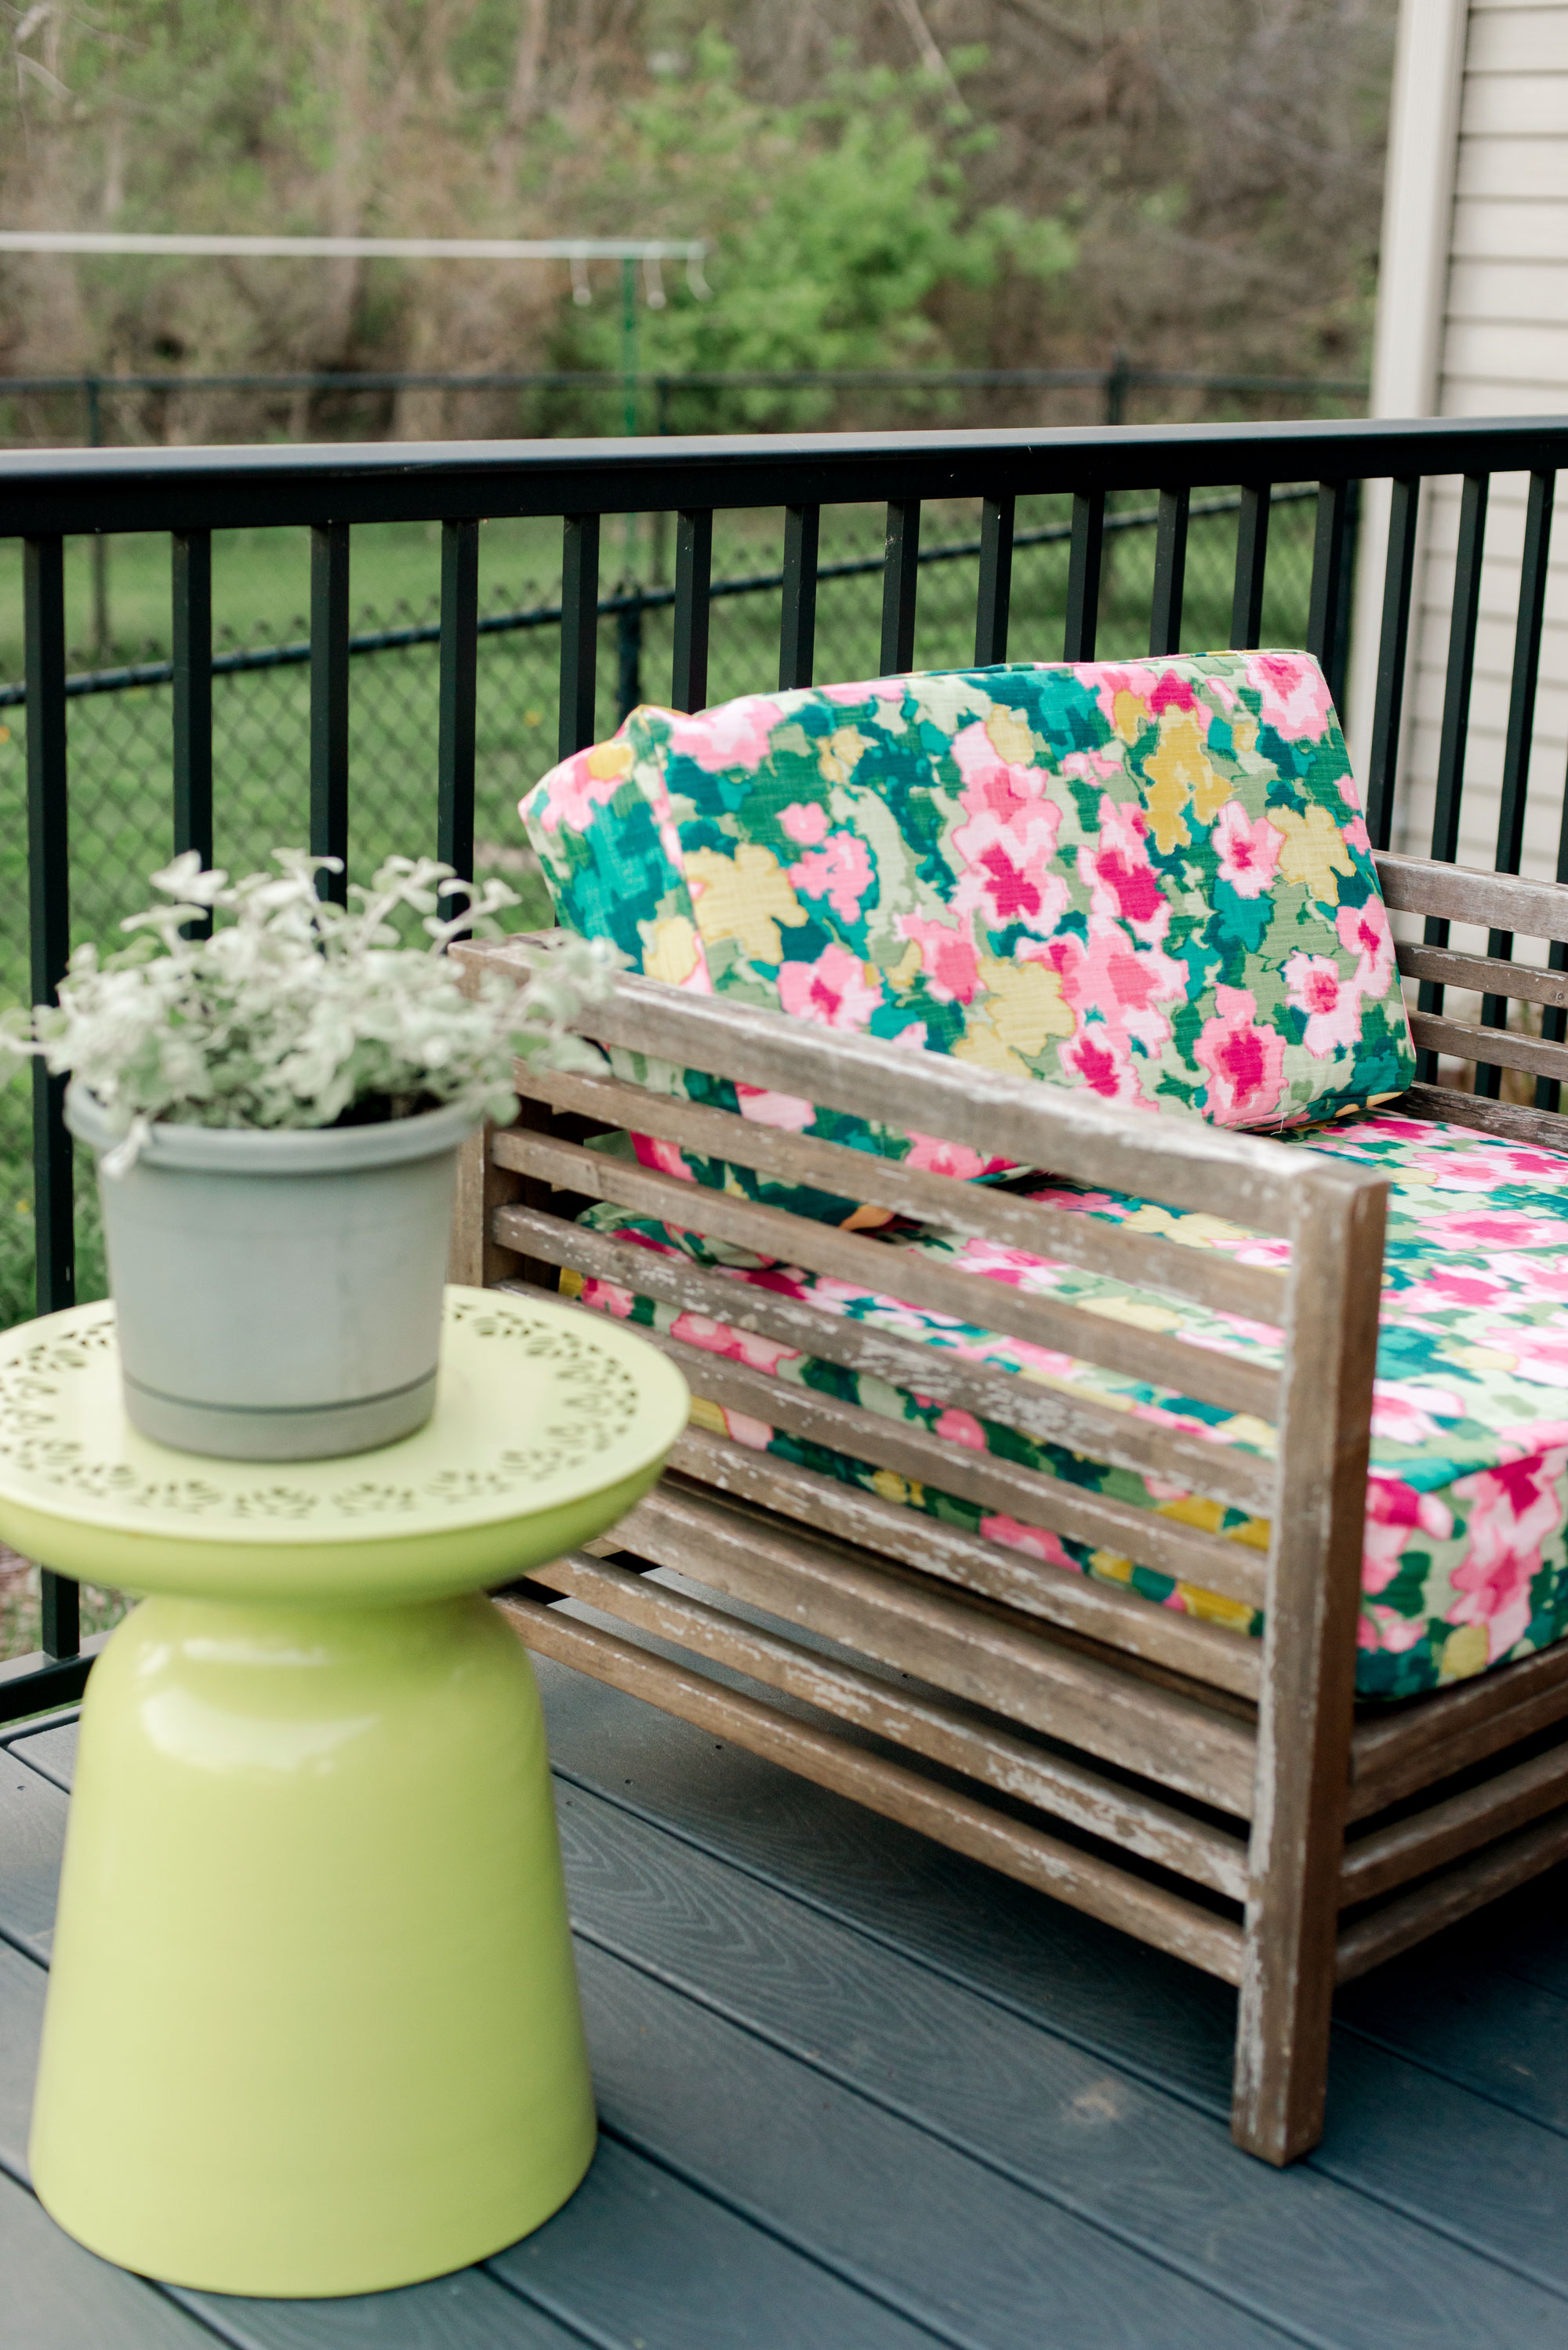 How to re-cover outdoor cushions | A quick + easy DIY